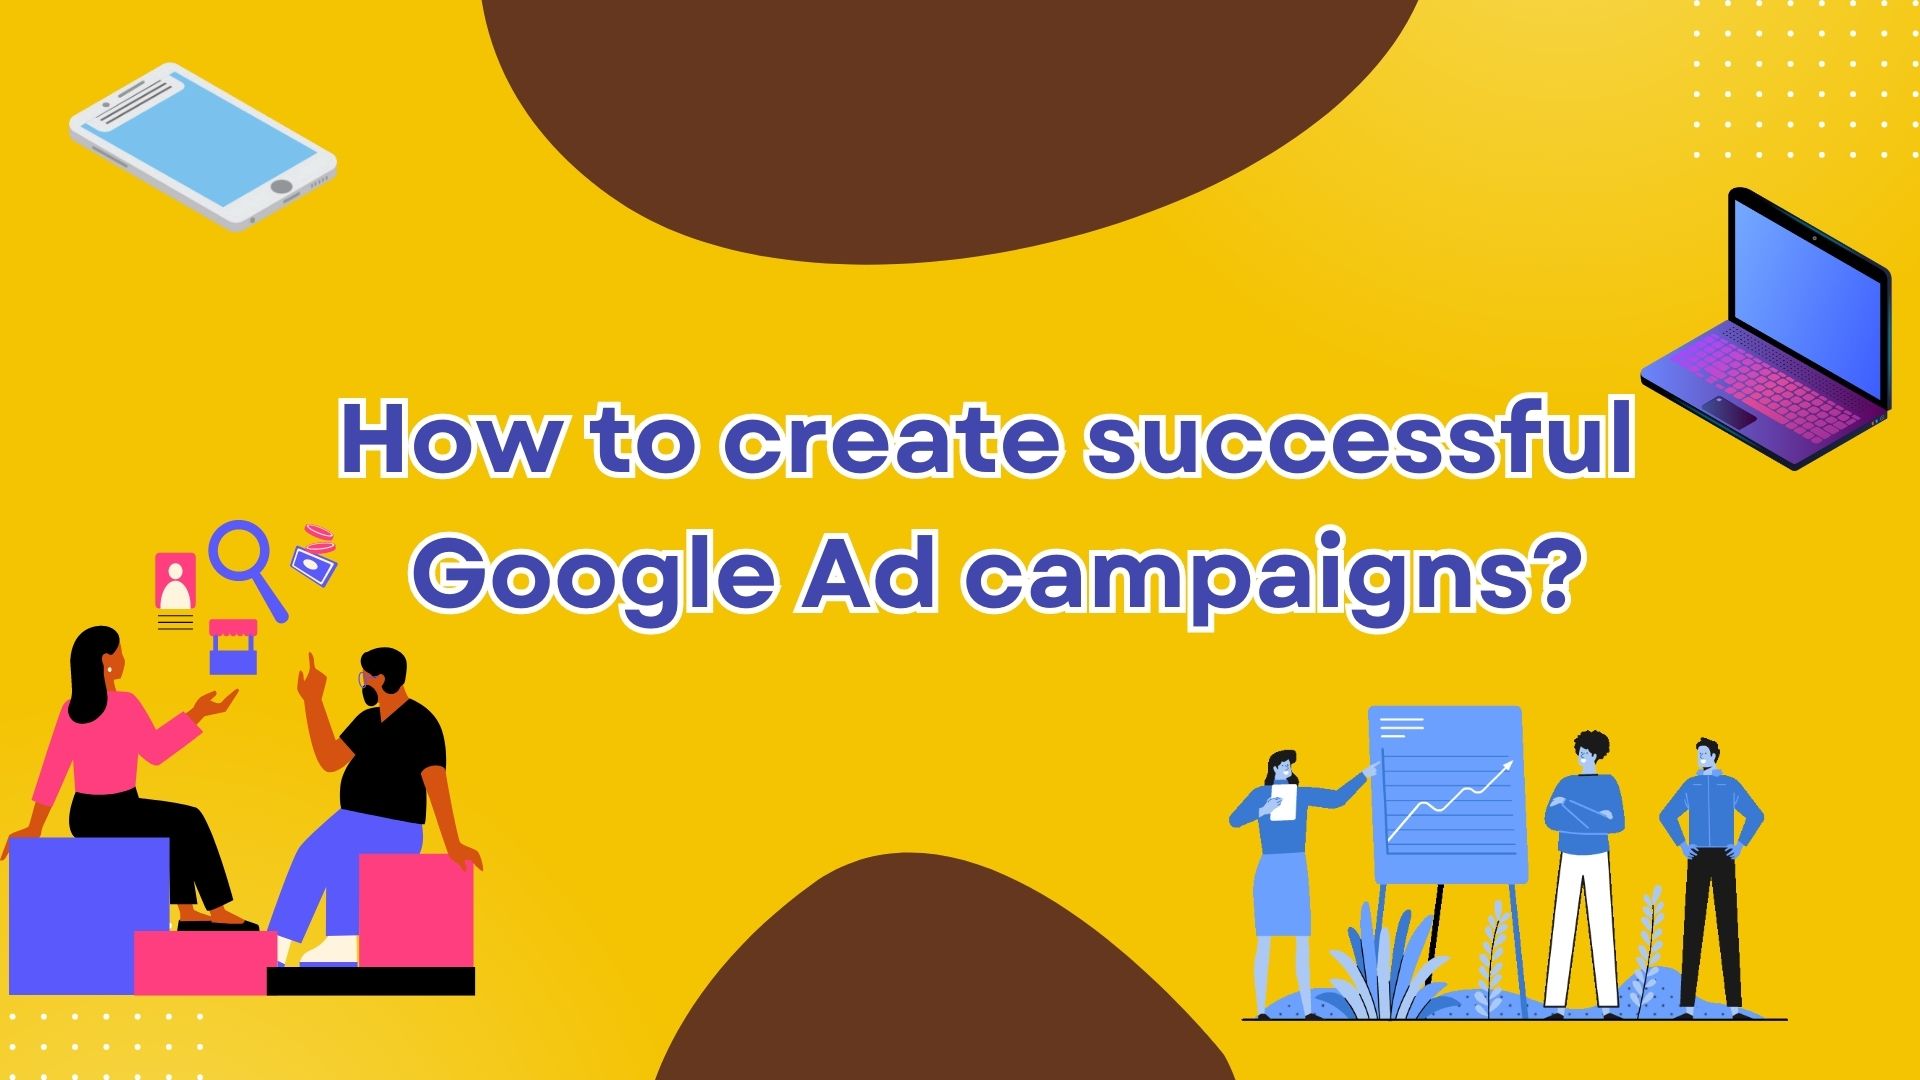 How to create successful Google Ad campaigns?